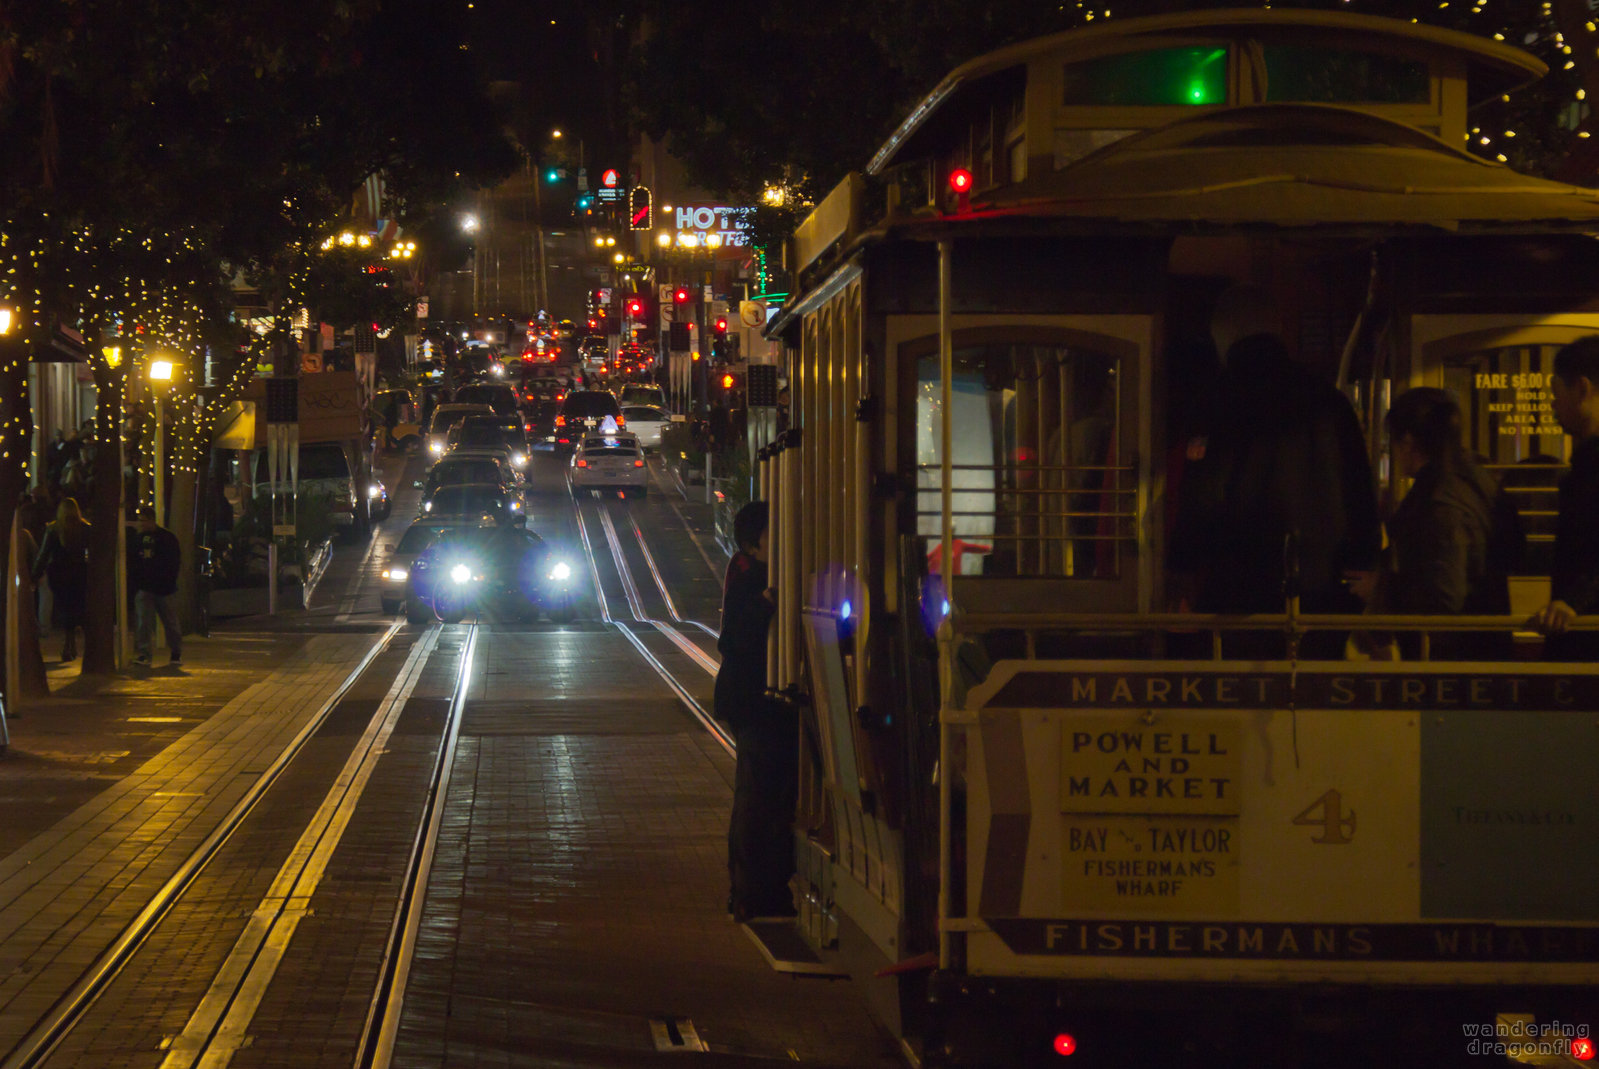 Cable car of Market Street at night -- cable car, night, street